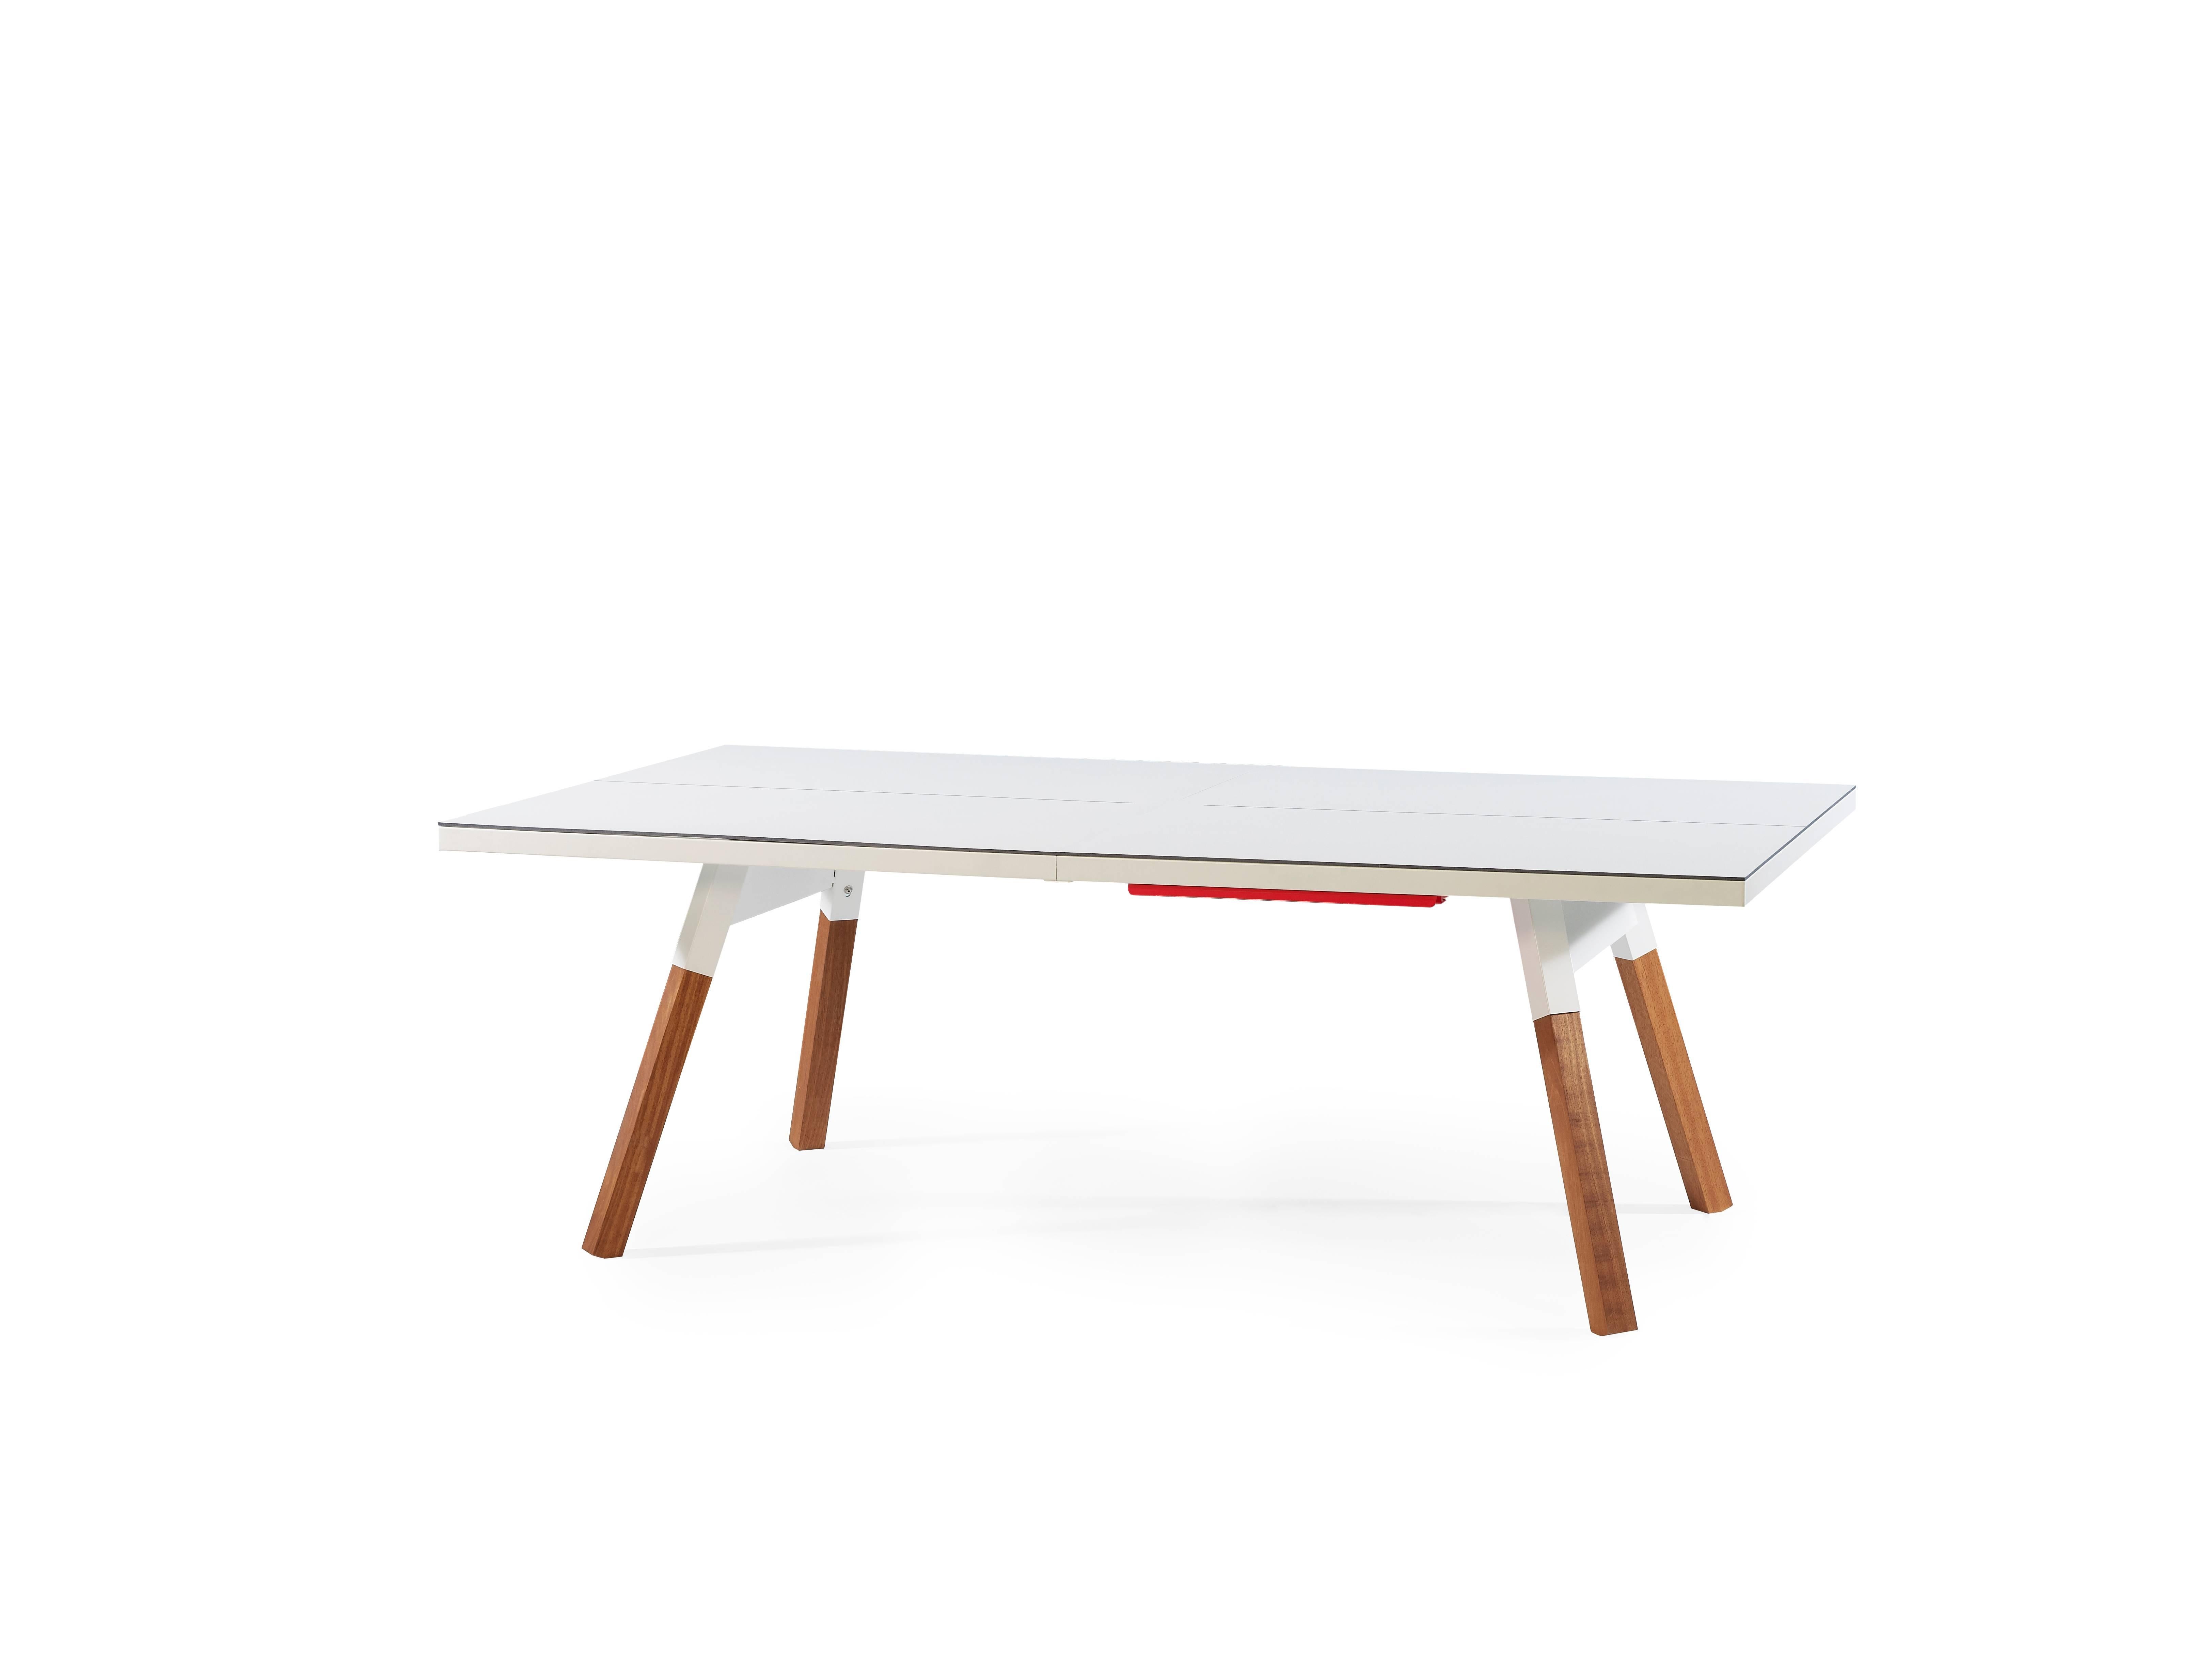 You and Me Medium is a ping pong table, with smaller dimensions for smaller spaces, a playing surface, a design and a structure that offers full playability. When not in use, all the sporting elements – the net, the paddles and the balls – are